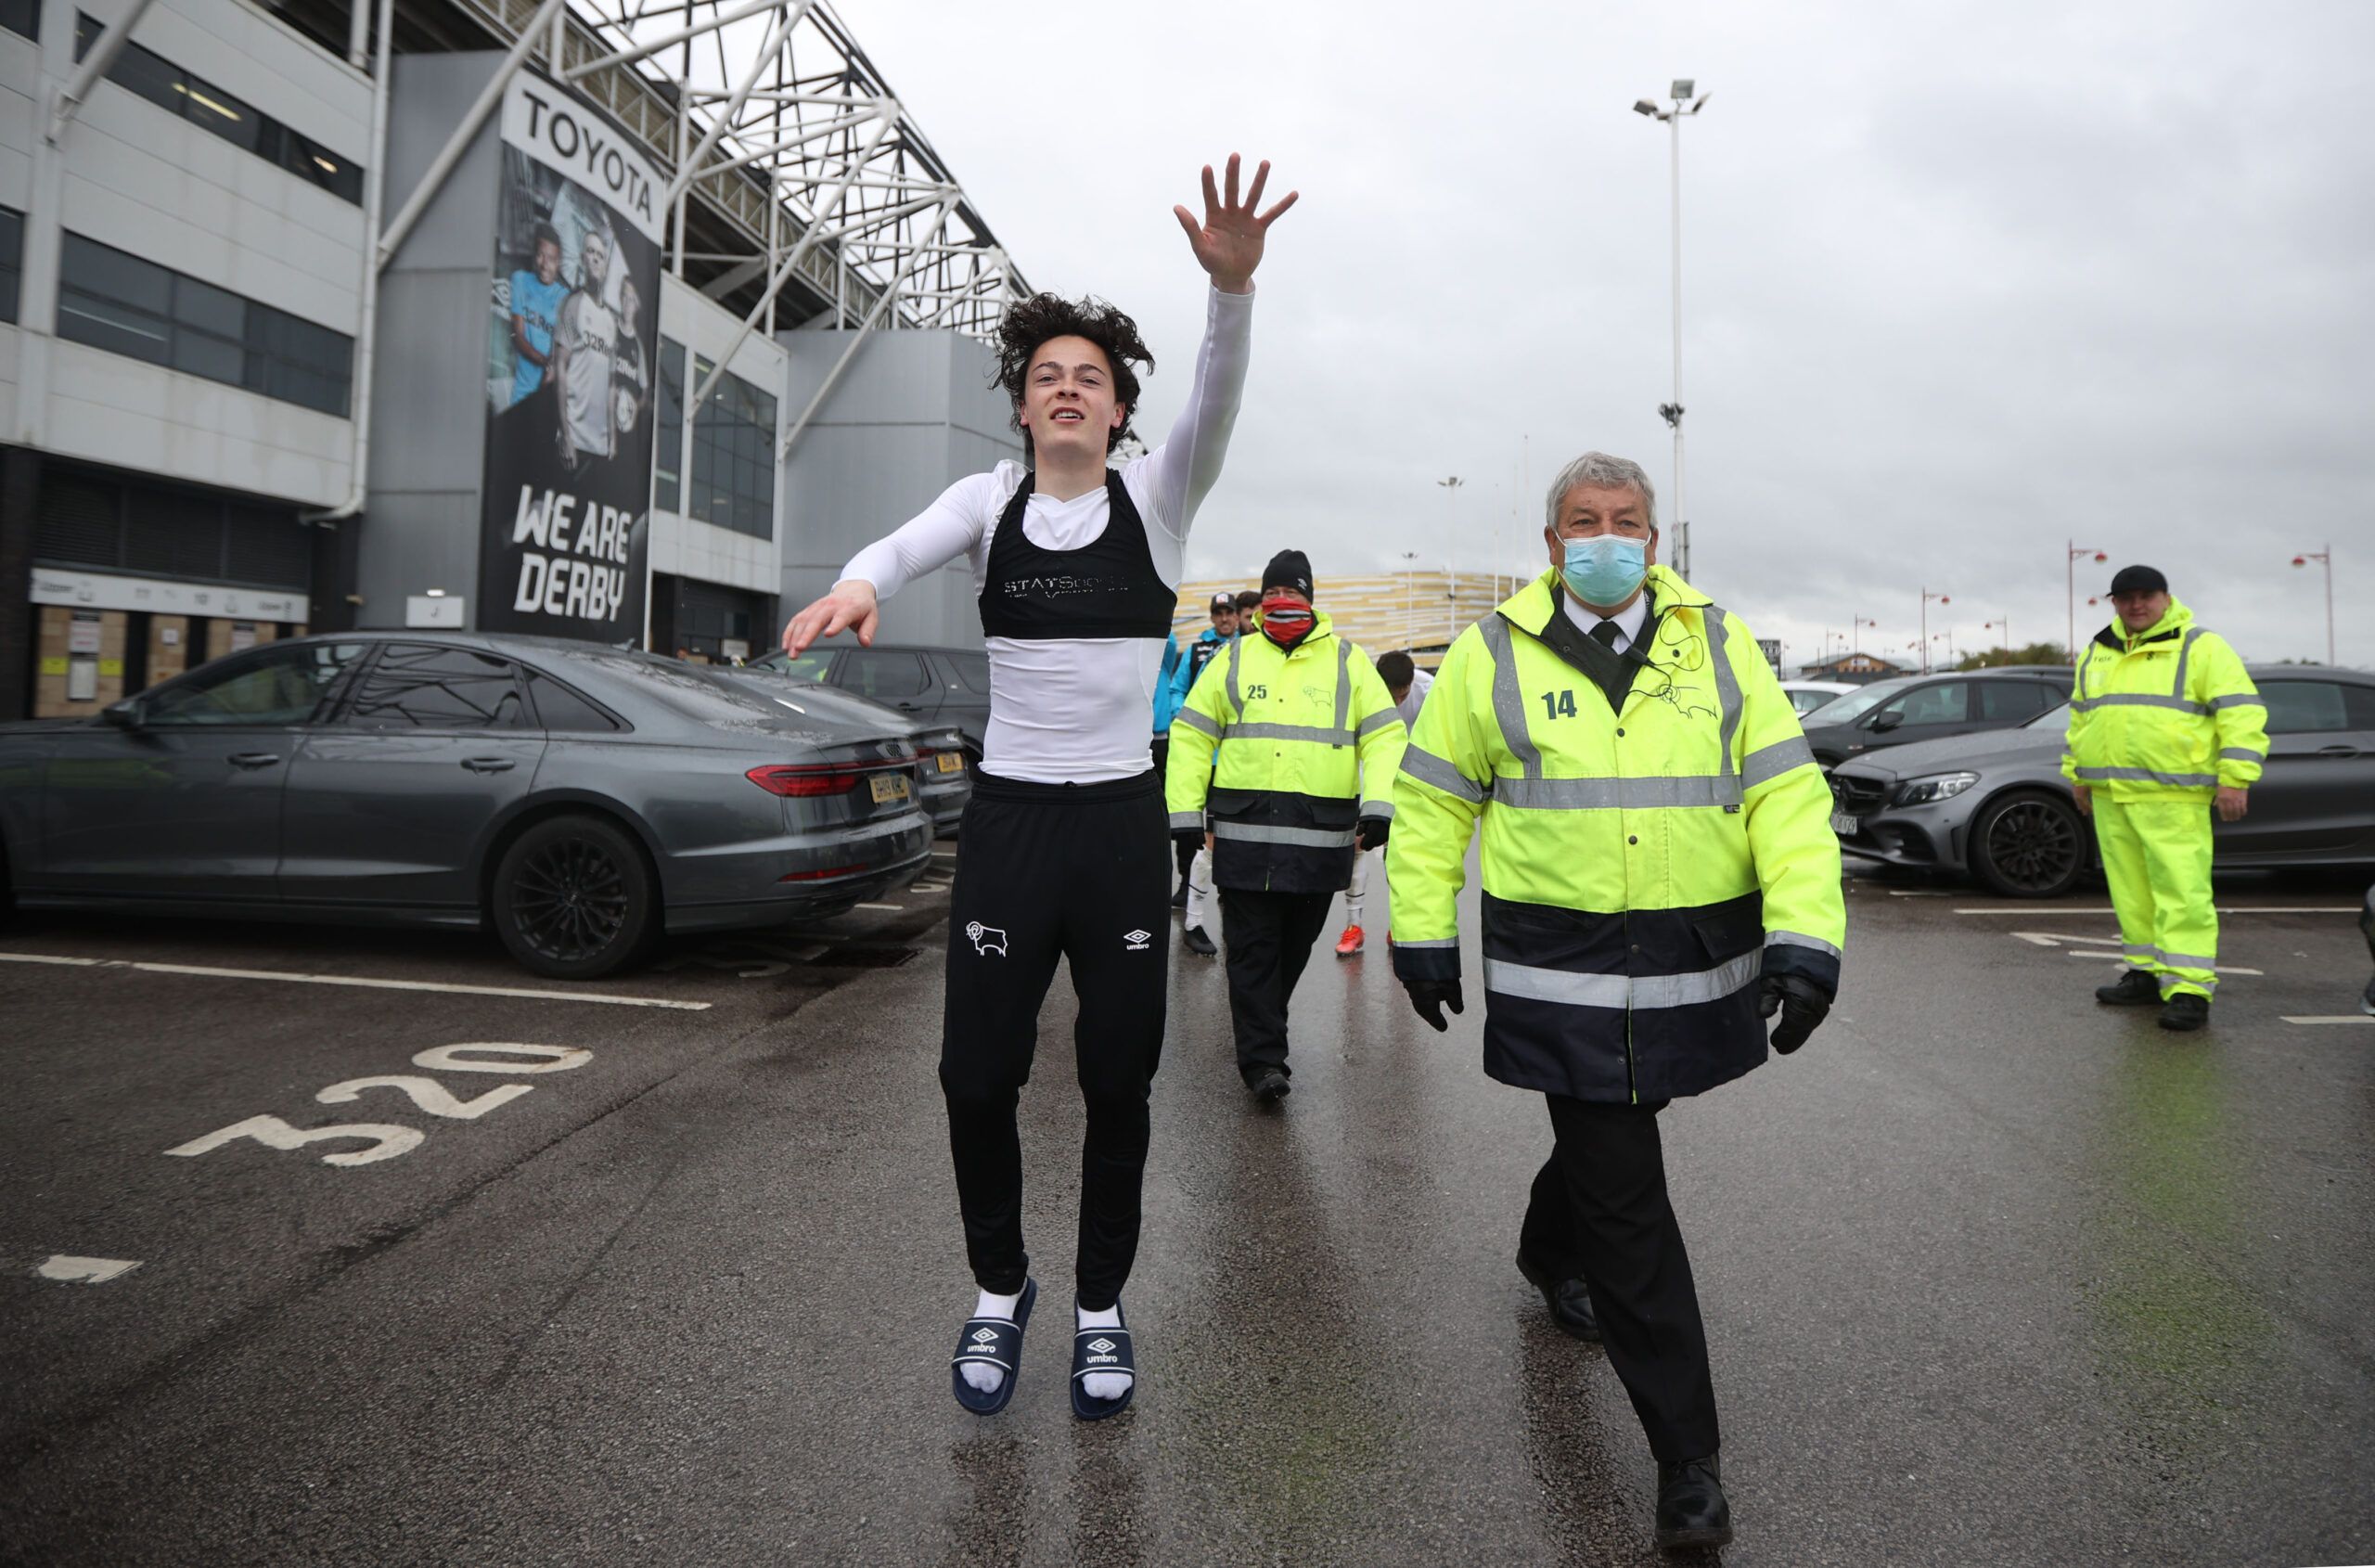 Soccer Football - Championship - Derby County v Sheffield Wednesday - Pride Park, Derby, Britain - May 8, 2021 Derby County's Louie Watson celebrates outside the stadium after avoiding relegation Action Images/Molly Darlington EDITORIAL USE ONLY. No use with unauthorized audio, video, data, fixture lists, club/league logos or 'live' services. Online in-match use limited to 75 images, no video emulation. No use in betting, games or single club /league/player publications.  Please contact your acc